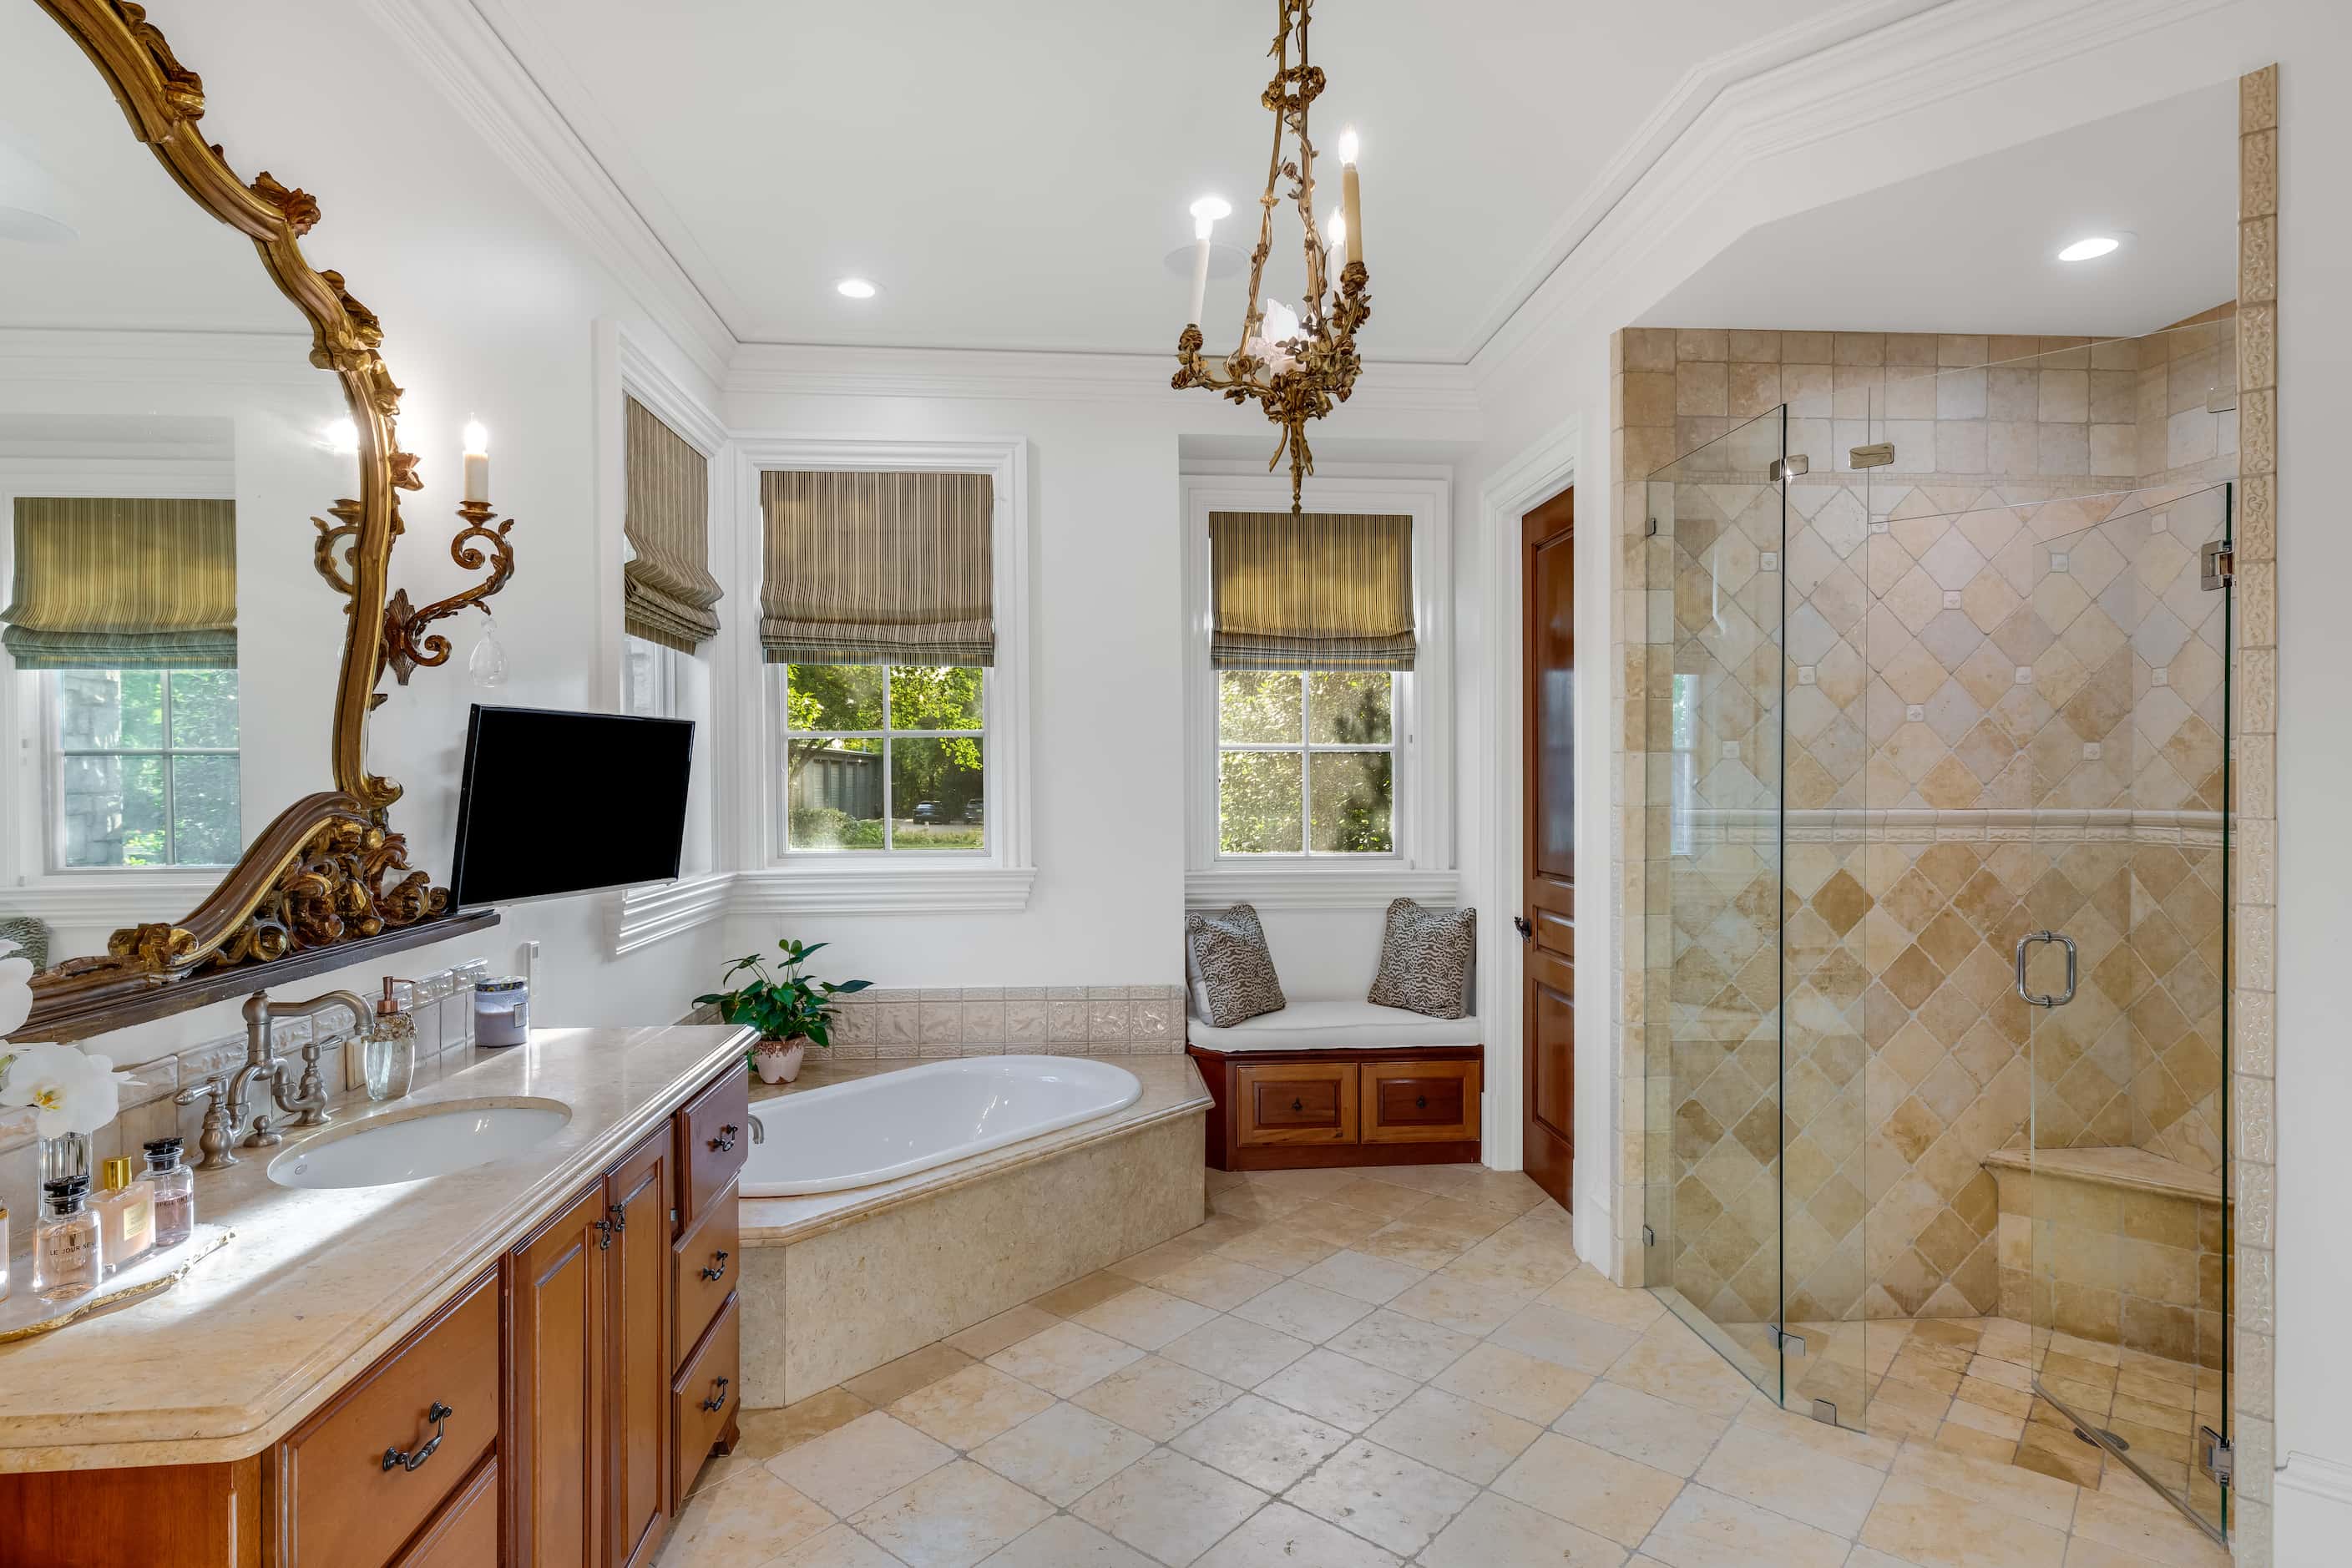 An English manor-style estate in Colleyville hit the market for $8.75 million. The home at...